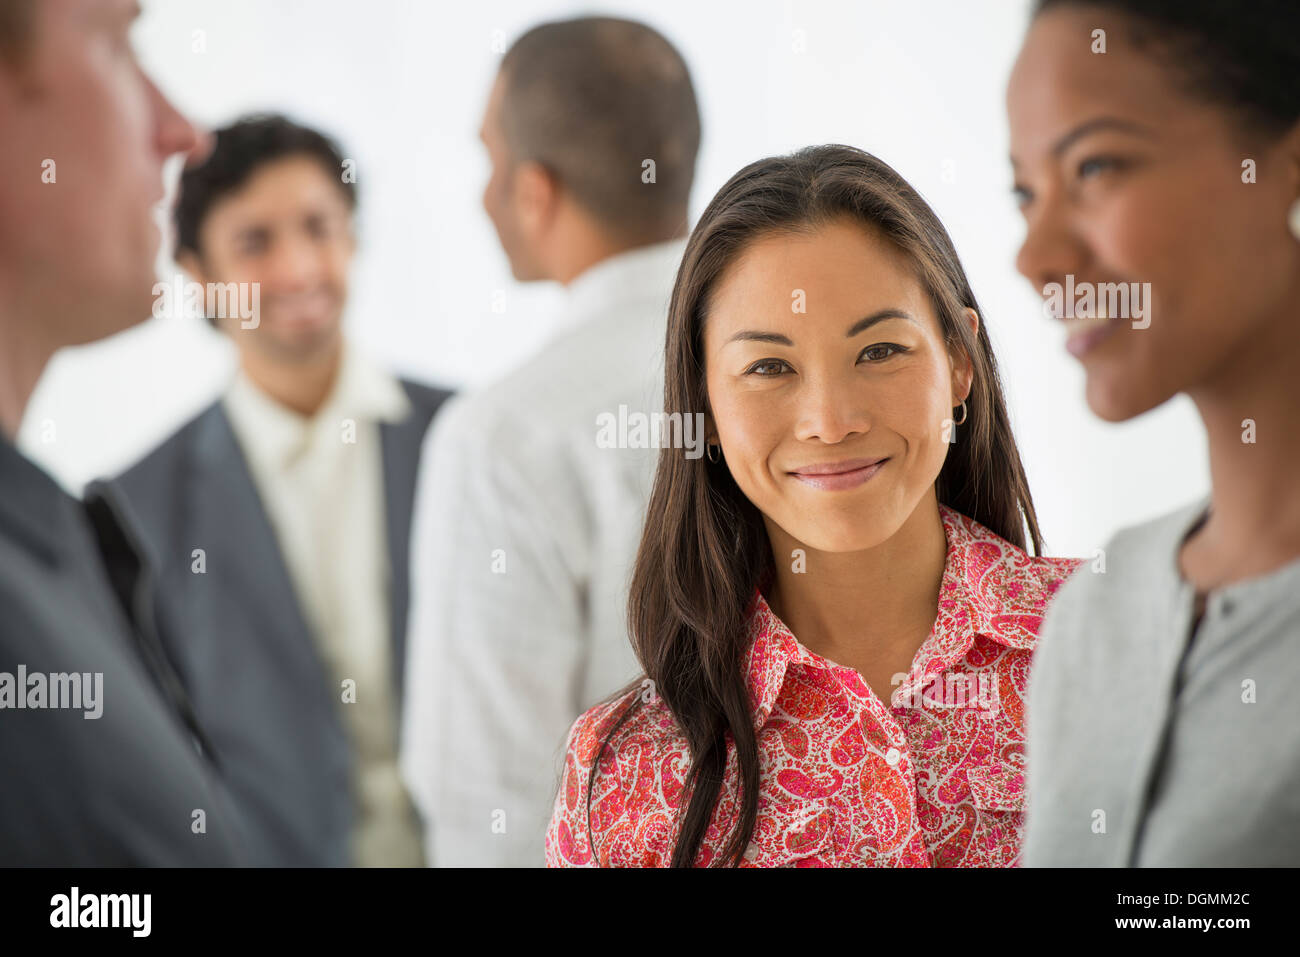 Business. A team of people, a multi ethnic group, men and women in a group. Stock Photo